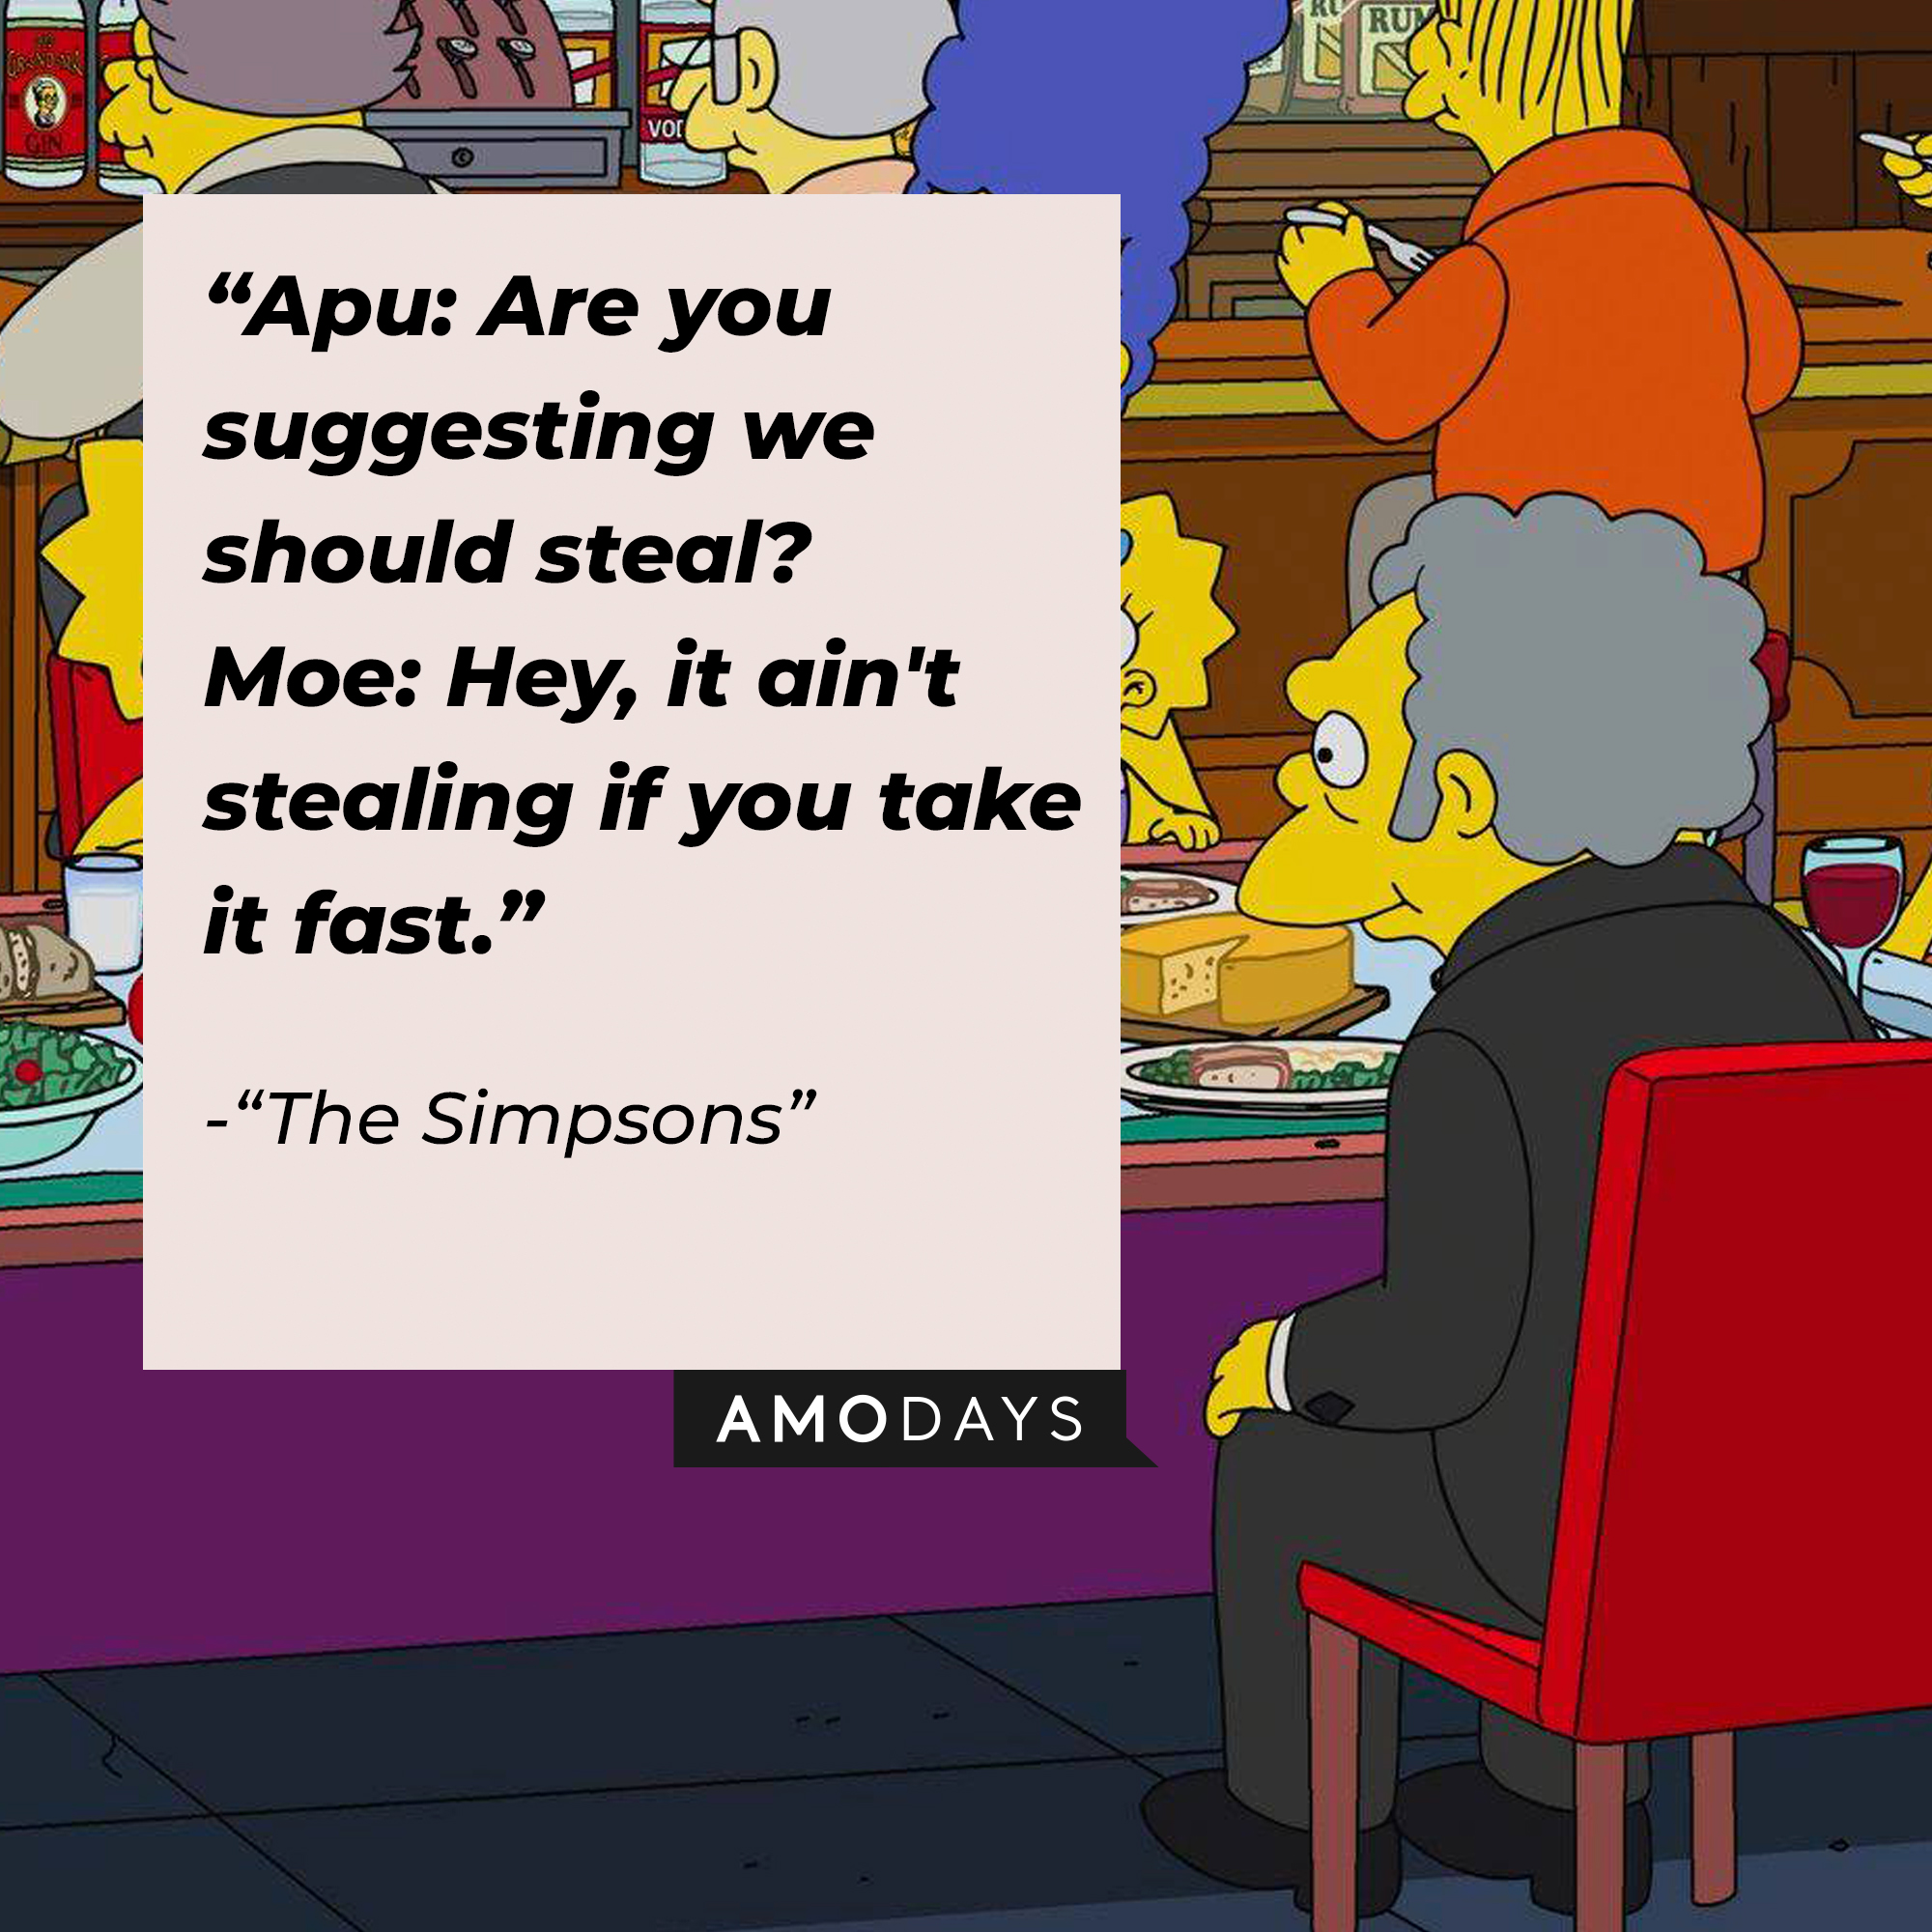 Image of Moe Szyslak with his quote from "The Simpsons:" "Apu: Are you suggesting we should steal? ; Moe: Hey, it ain't stealing if you take it fast."  | Source: Facebook.com/TheSimpsons